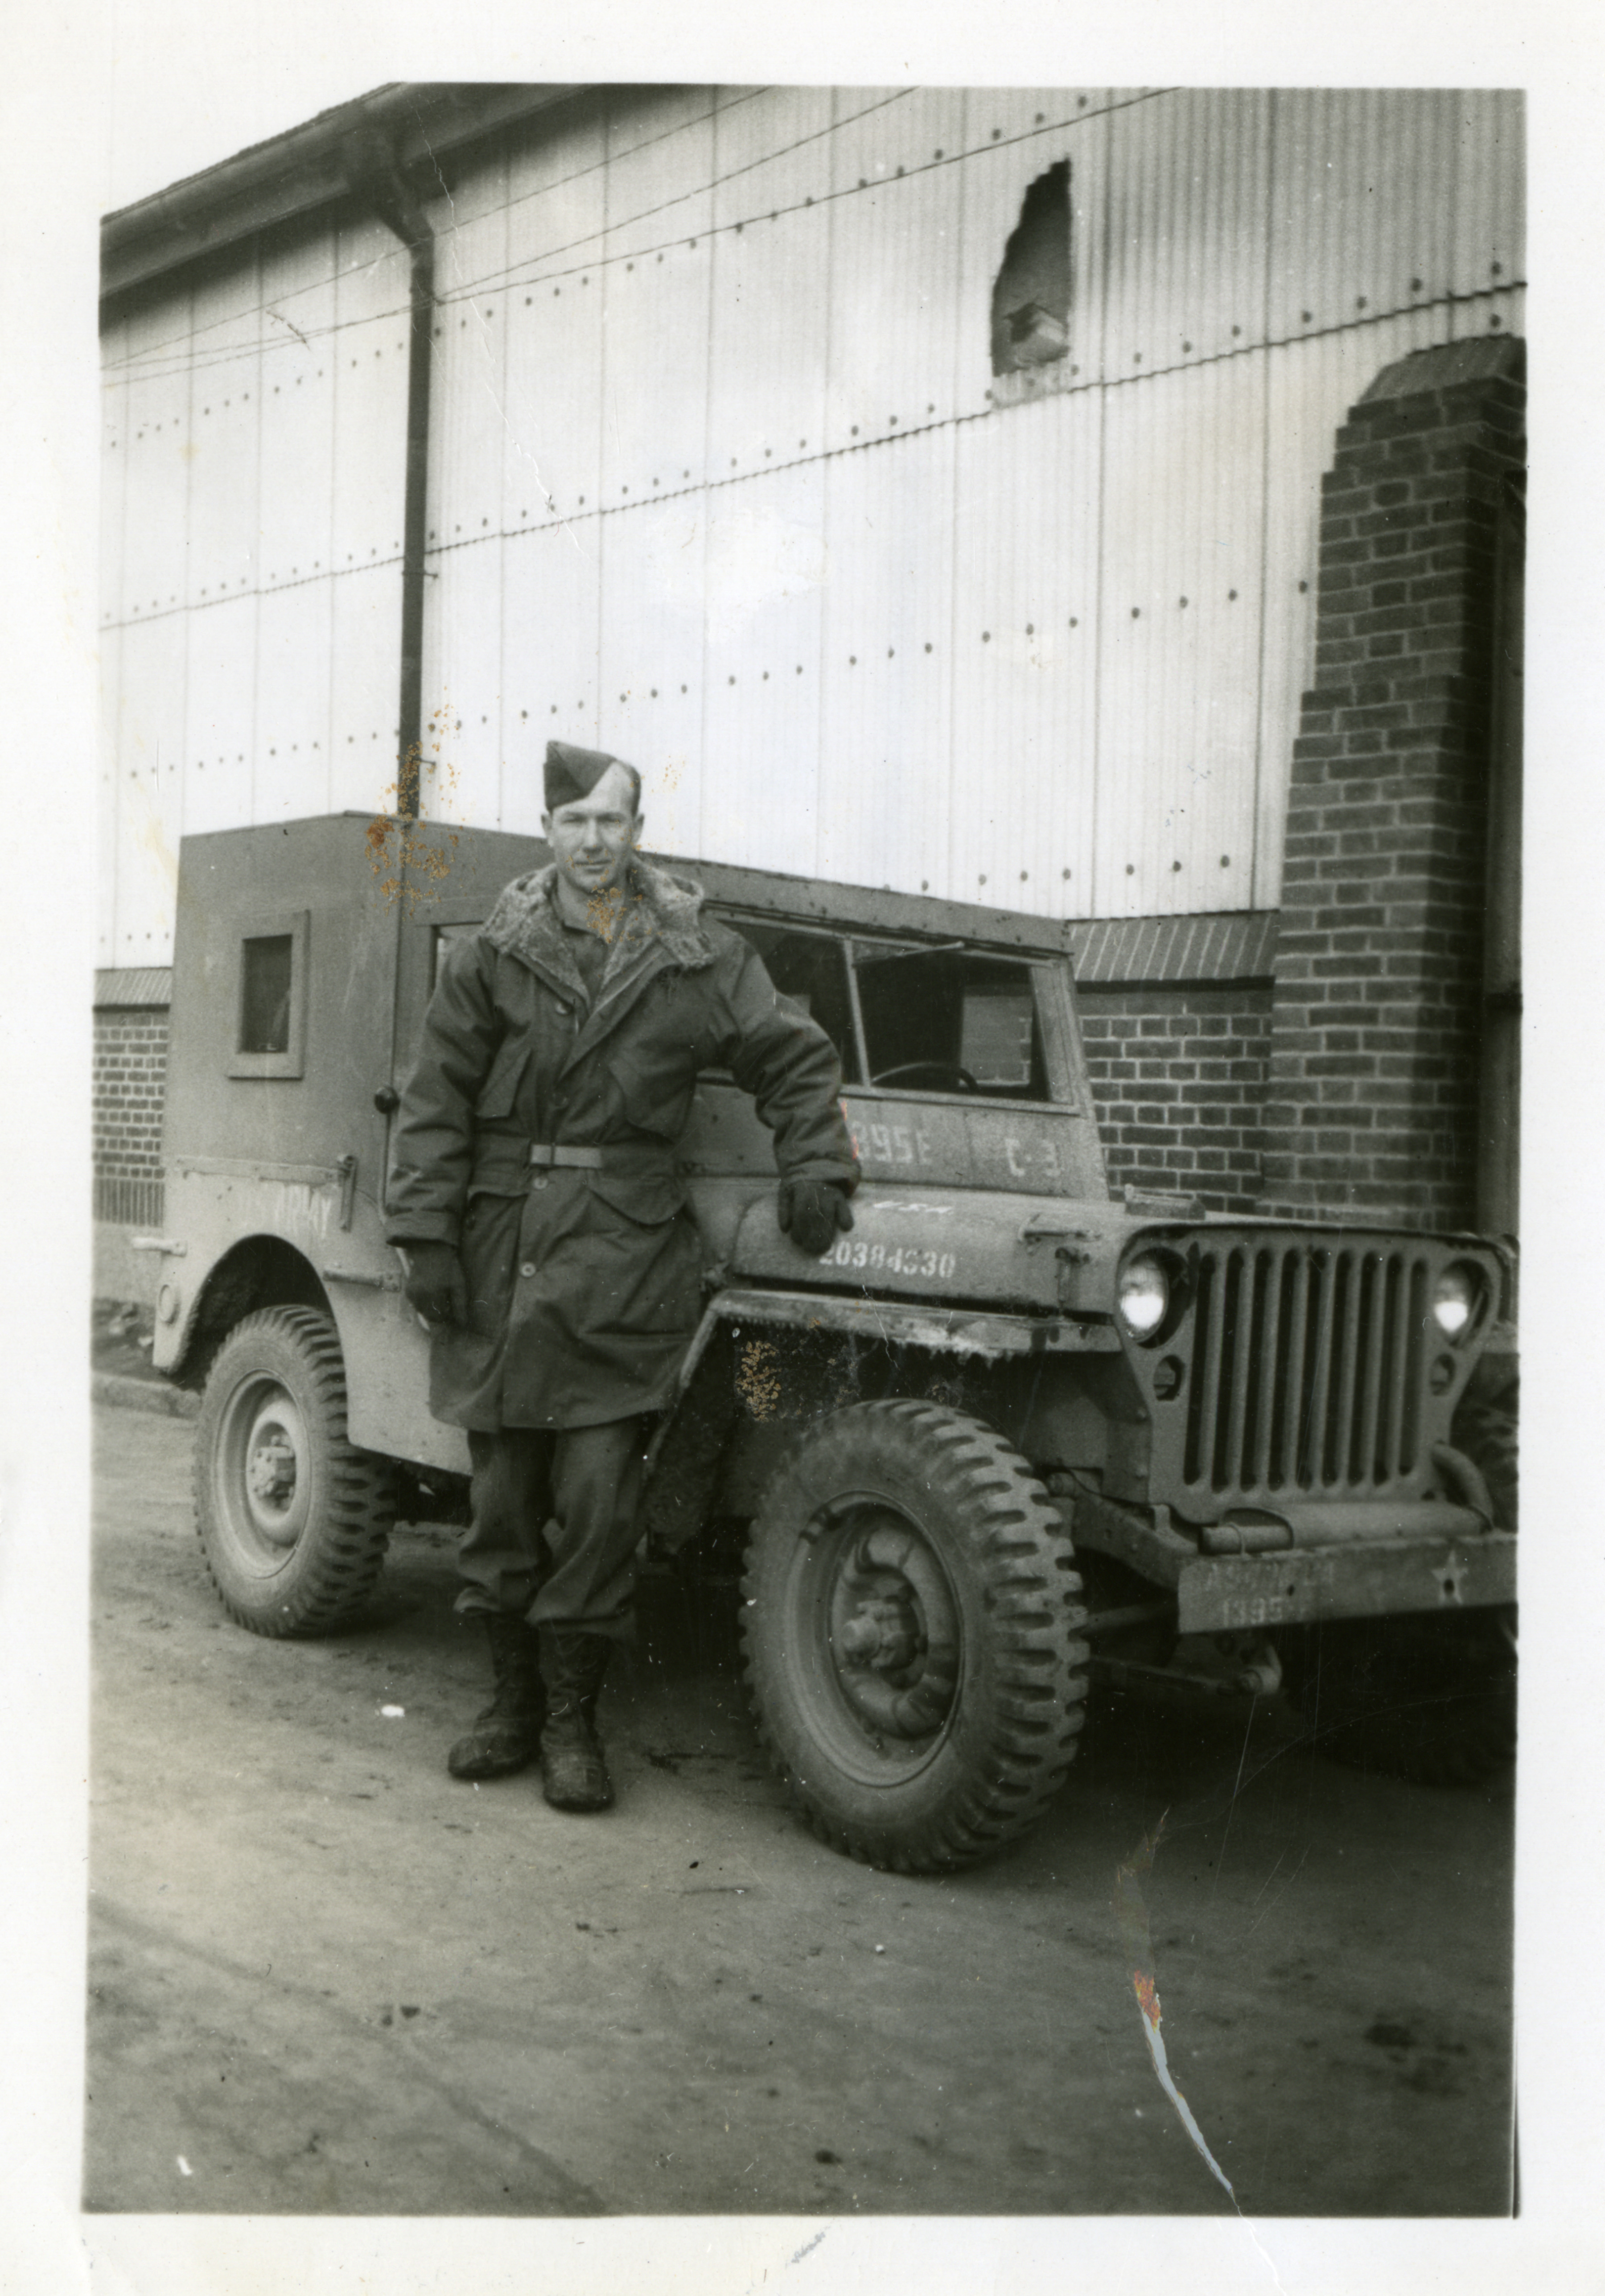 Reed in winter gear poses next to a Jeep | The Digital Collections of ...